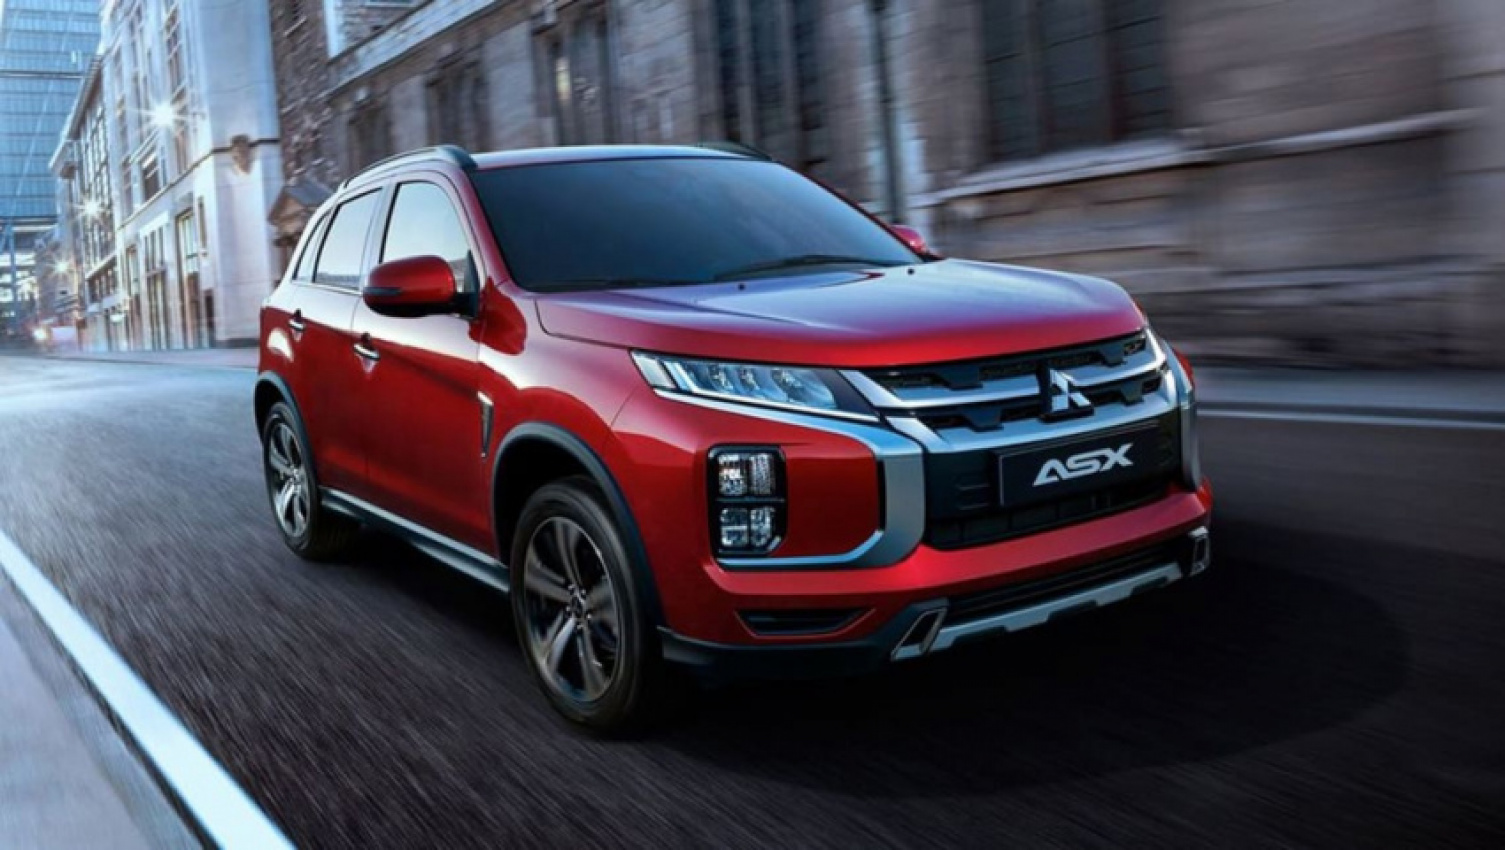 autos, cars, holden, mitsubishi, family cars, industry news, mitsubishi asx, mitsubishi asx 2022, mitsubishi news, mitsubishi suv range, renault captur, renault captur 2022, renault news, renault suv range, showroom news, small cars, don't wait! why you should buy a 2022 mitsubishi asx now before it's too late because everything's about to change, holden vf to zb commodore style